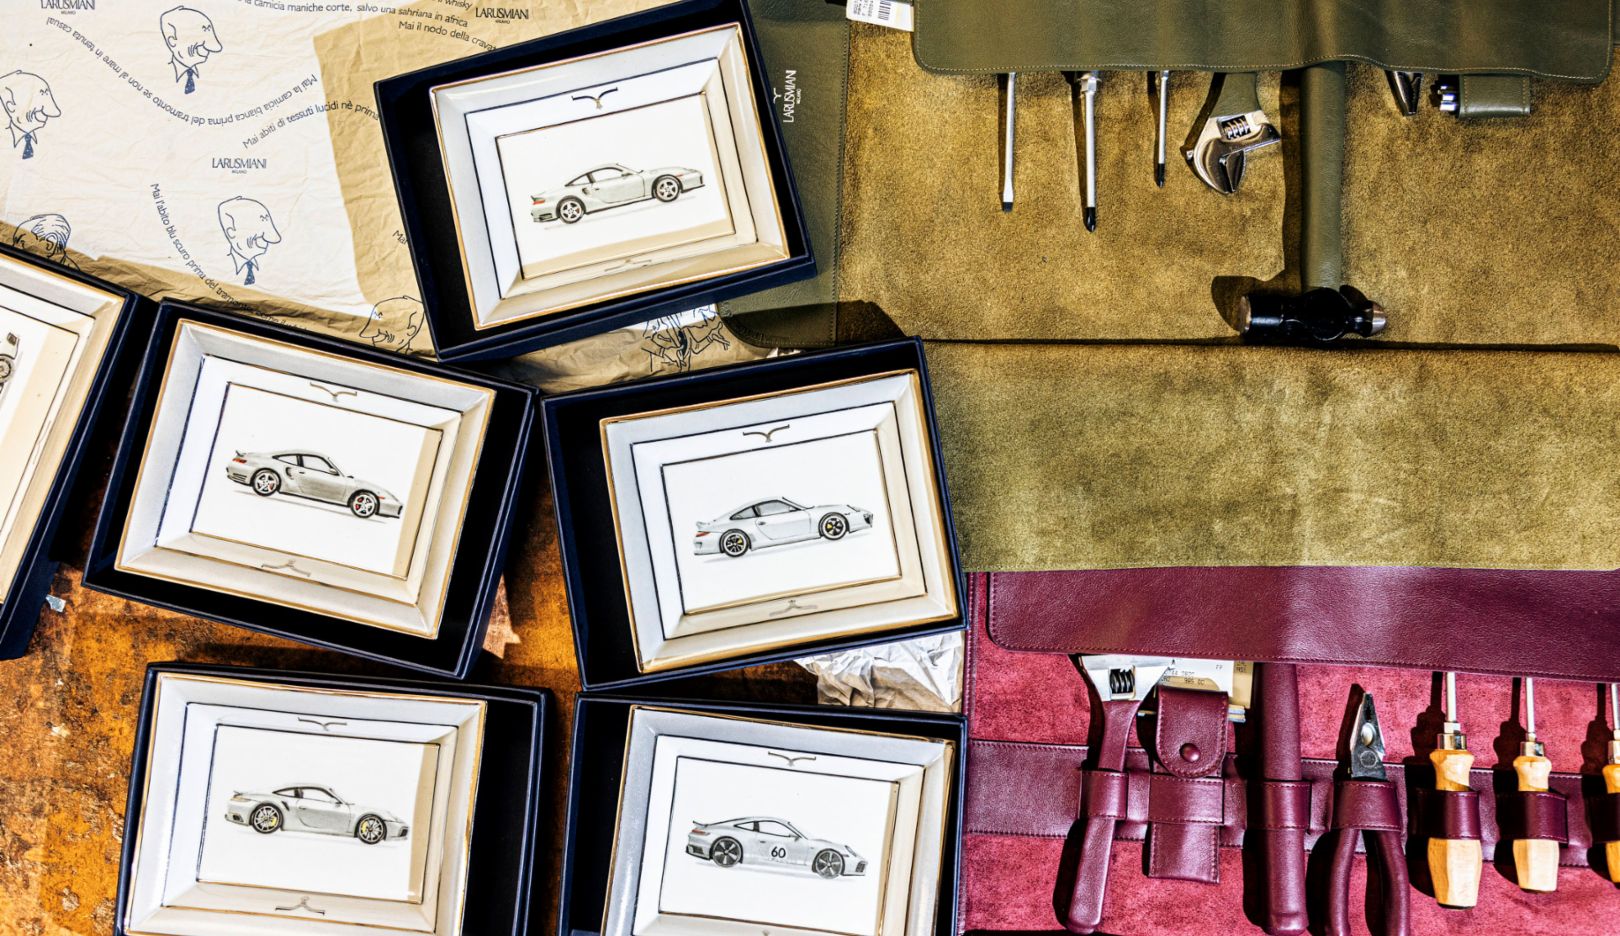 Leather car tool sets are also to be found in Larusmiani’s collection.